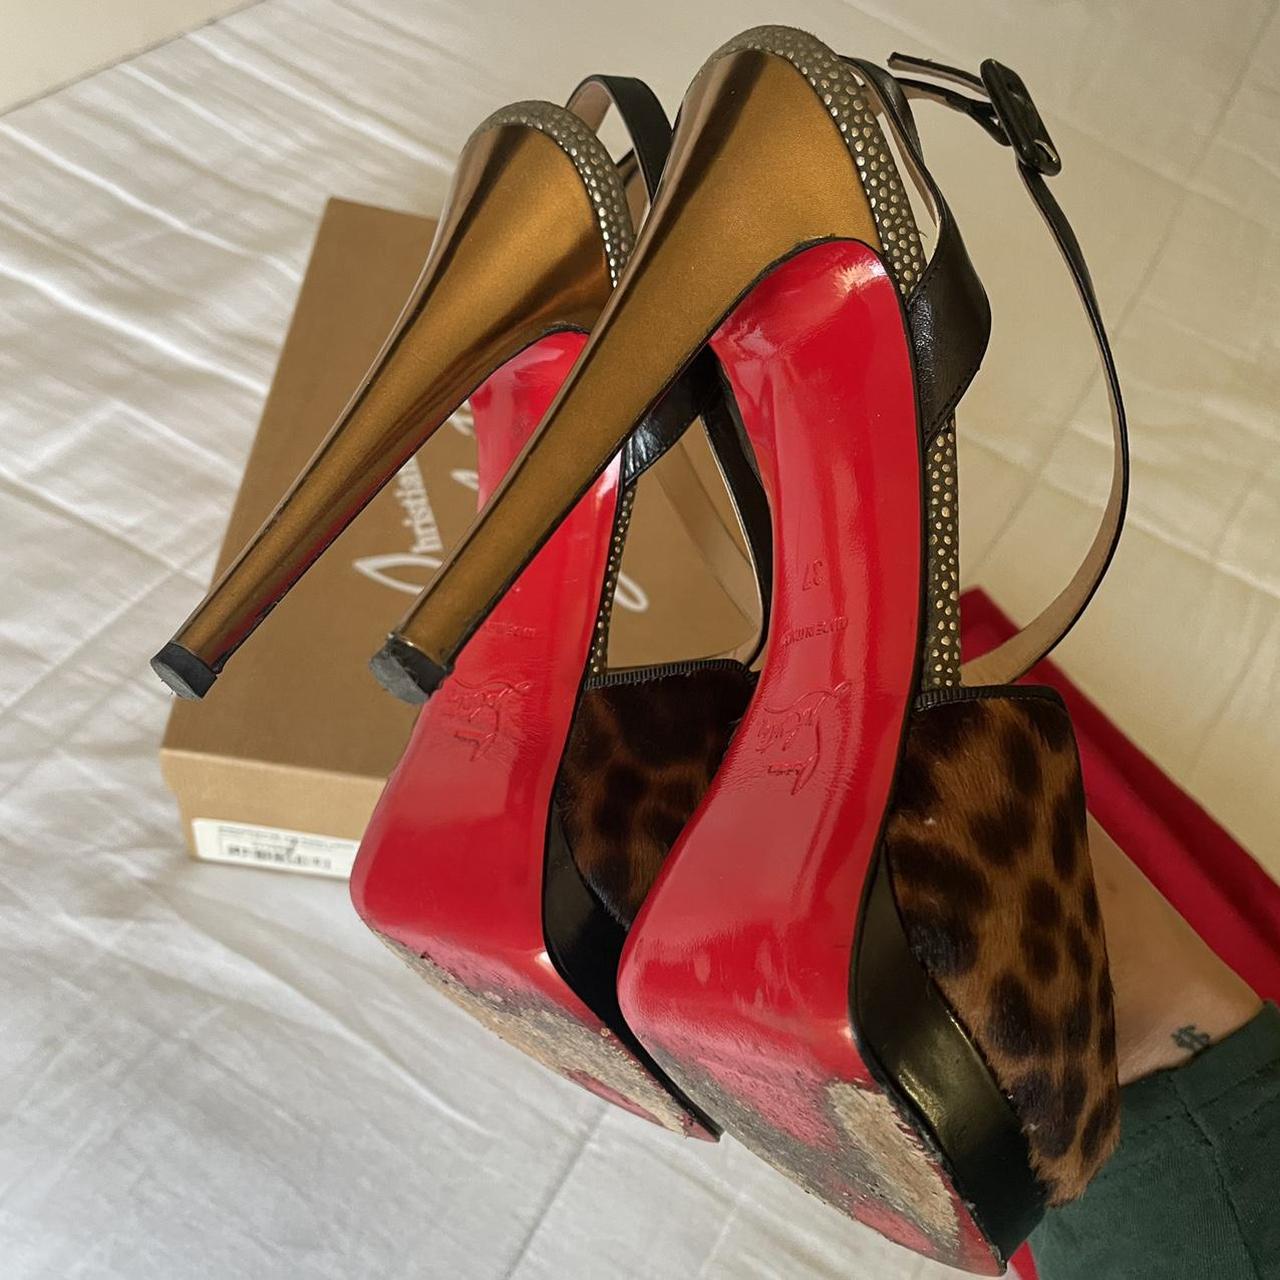 sell red bottom shoes Highness pumps leopard print  Louis vuitton shoes  heels, Louis vuitton heels, Red bottom shoes